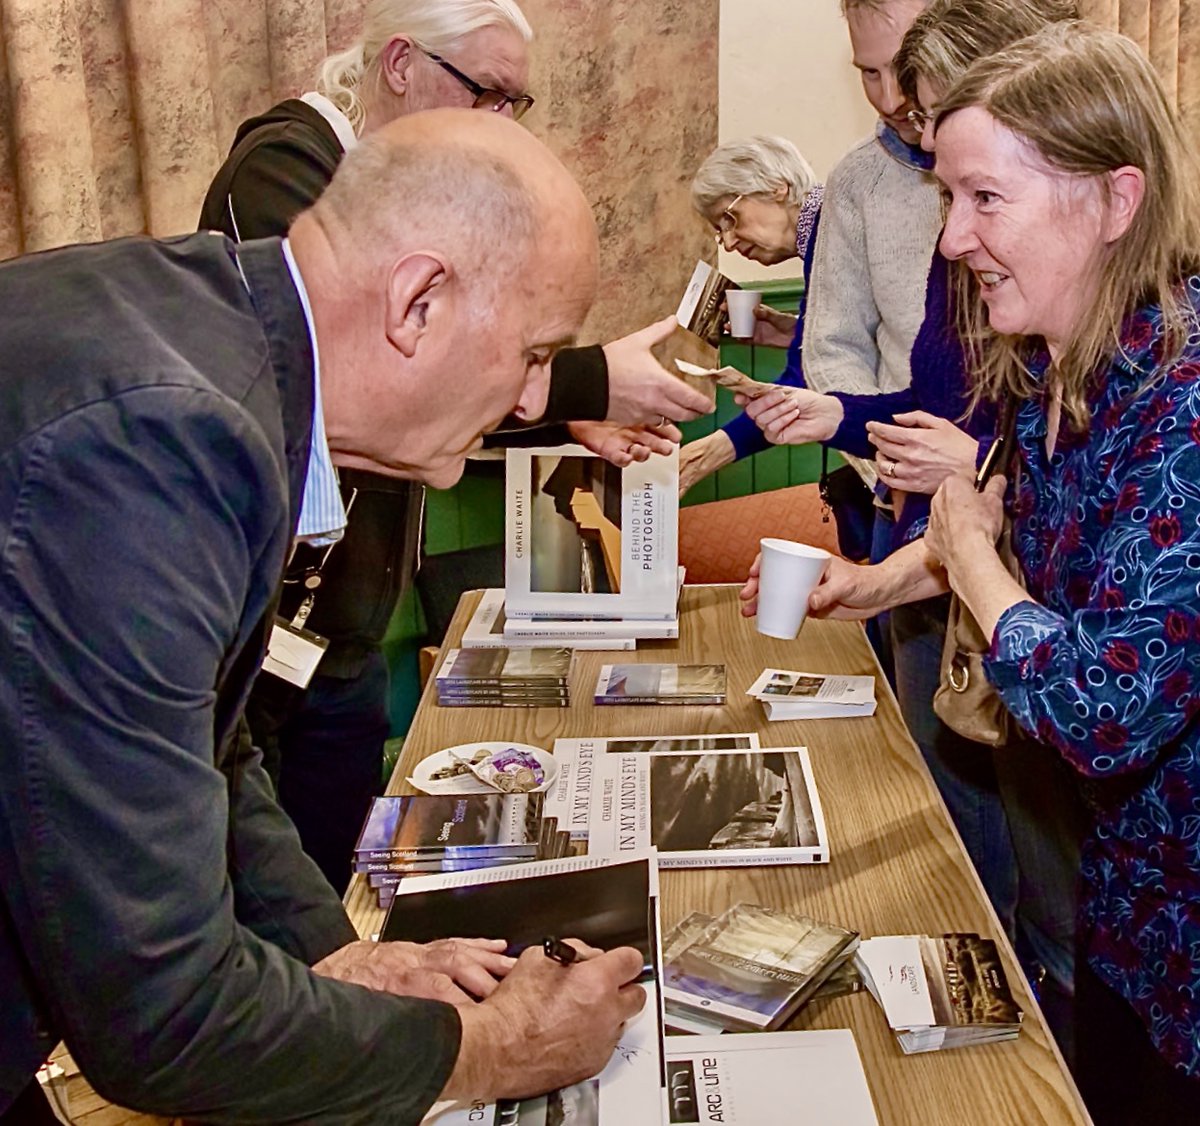 Highlight of the year at LPS on Tuesday. Charlie Waite, nationally and internationally renowned landscape photographer, was our guest speaker. Fascinating insights, superb images and time for all, to chat, present awards and sign books. @Charlie_Waite1